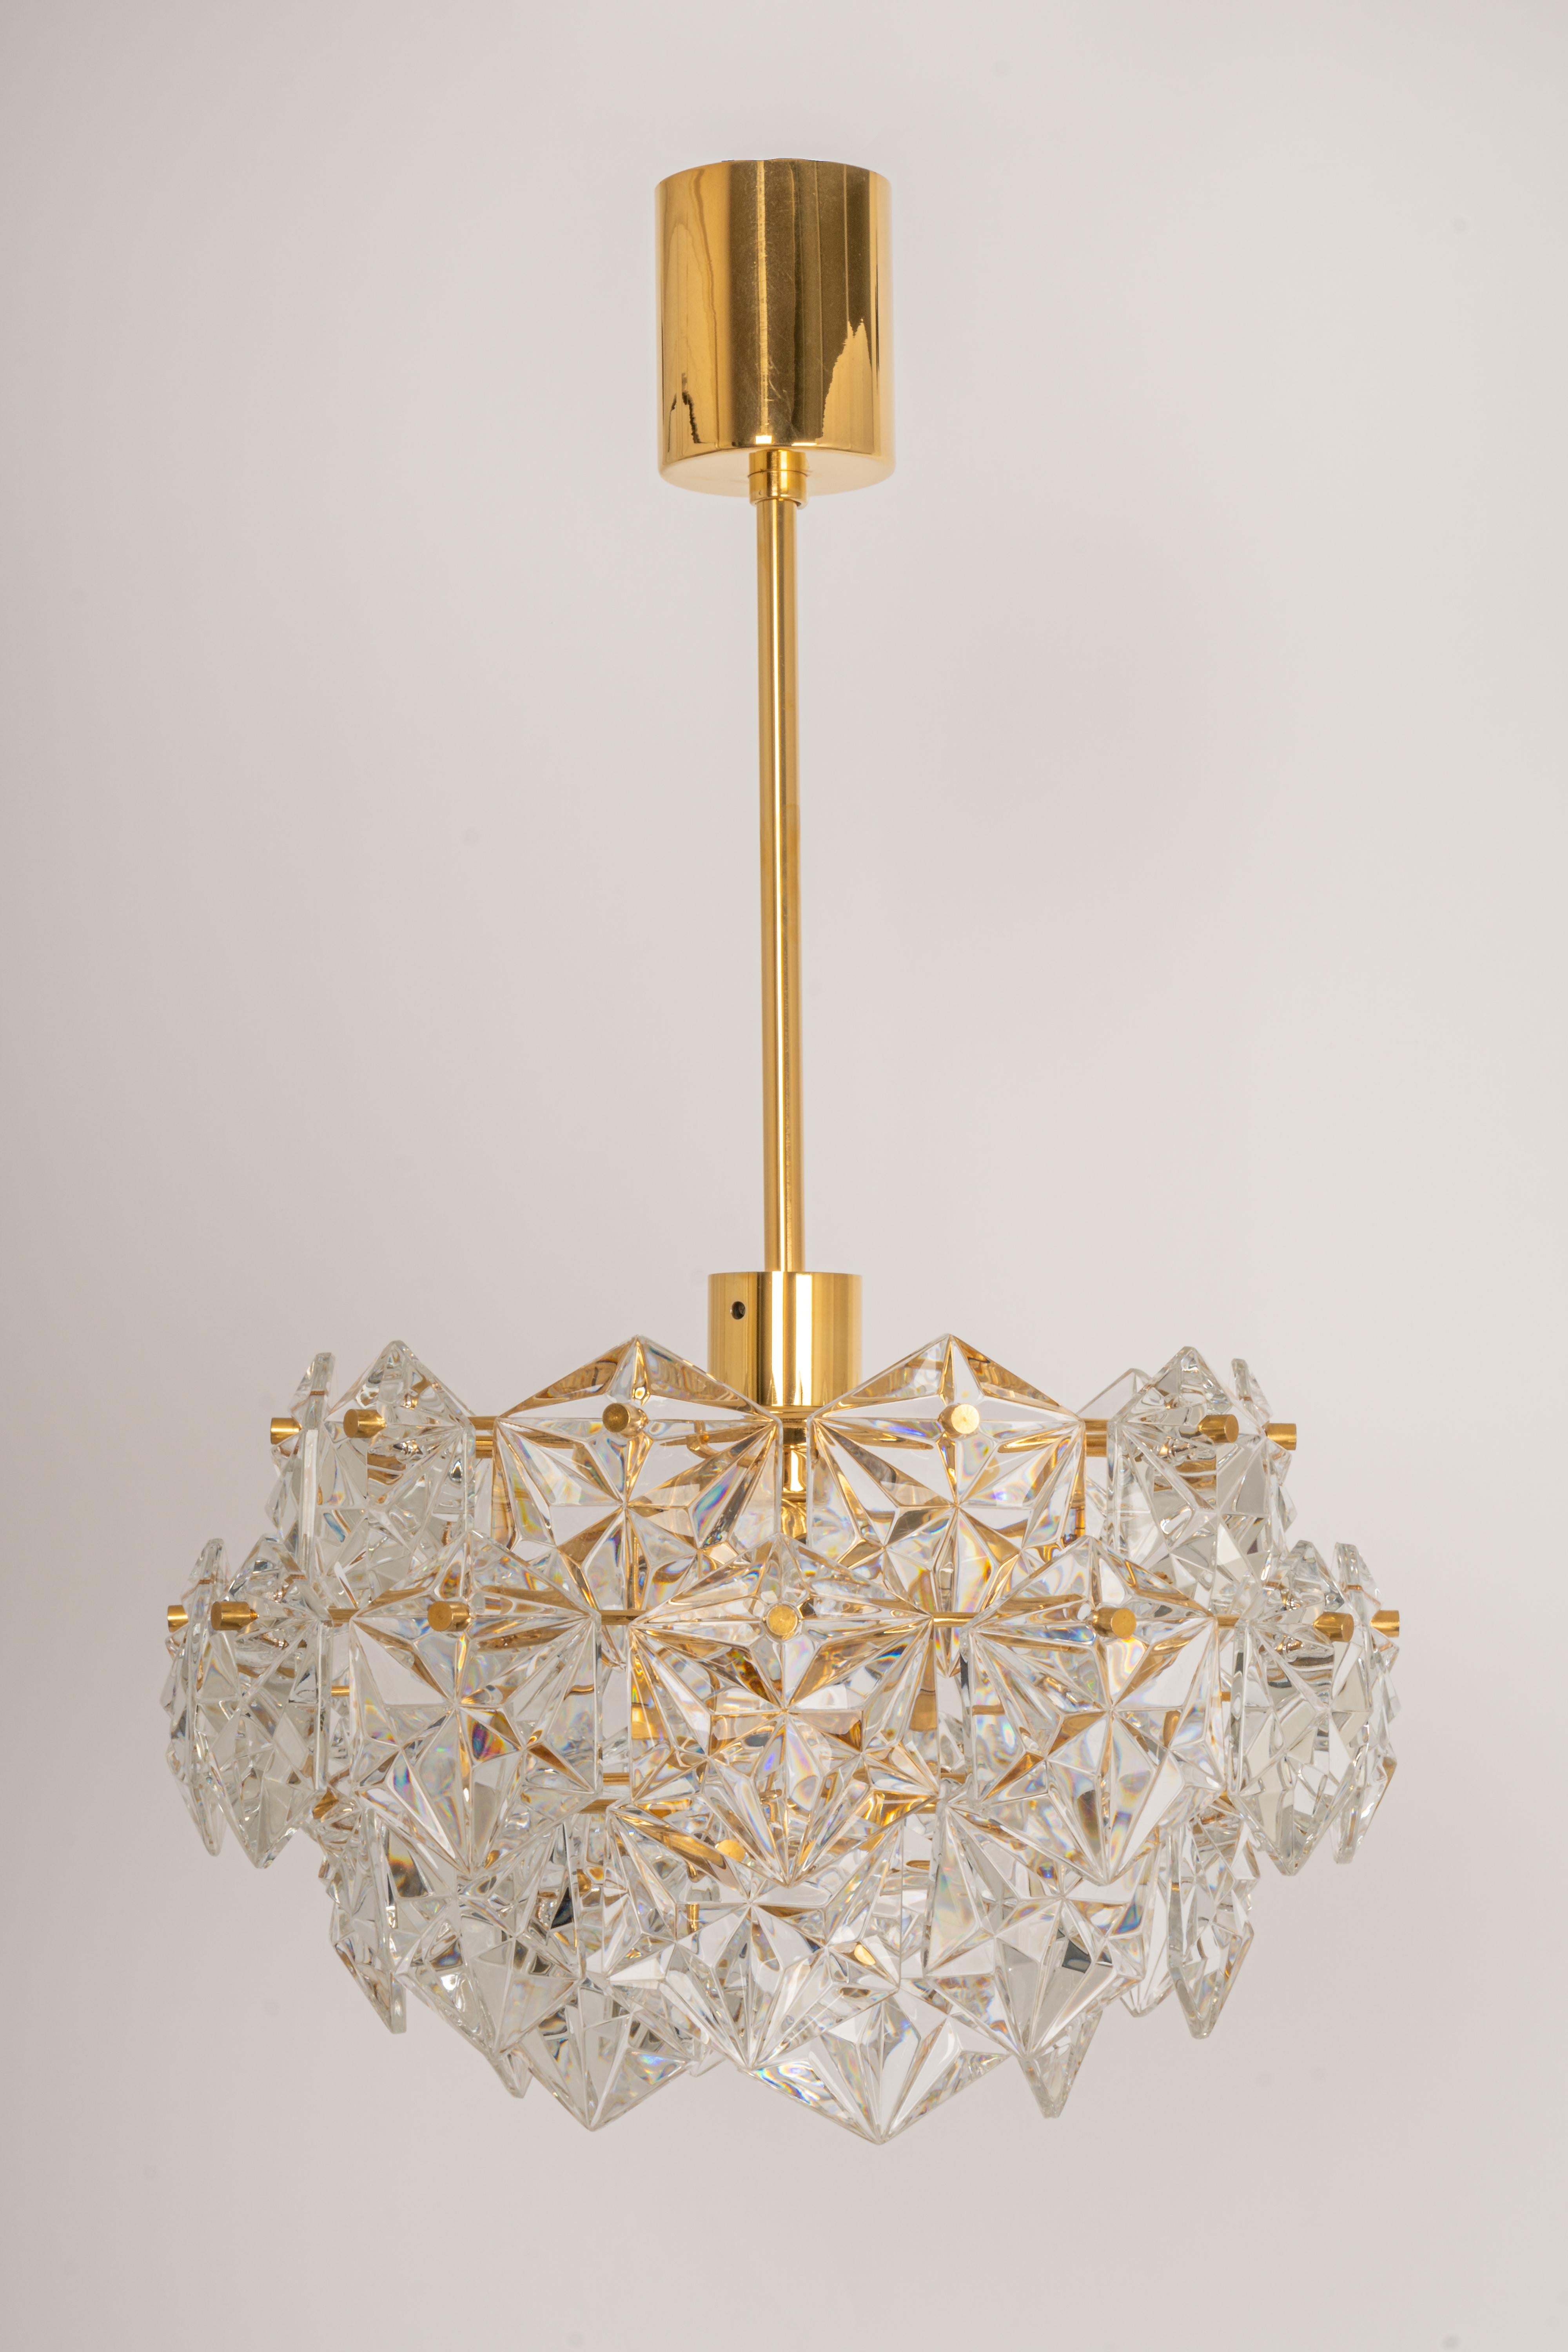 1 of 2 Petite Chandeliers, Brass and Crystal Glass by Kinkeldey, Germany, 1970s In Good Condition For Sale In Aachen, NRW